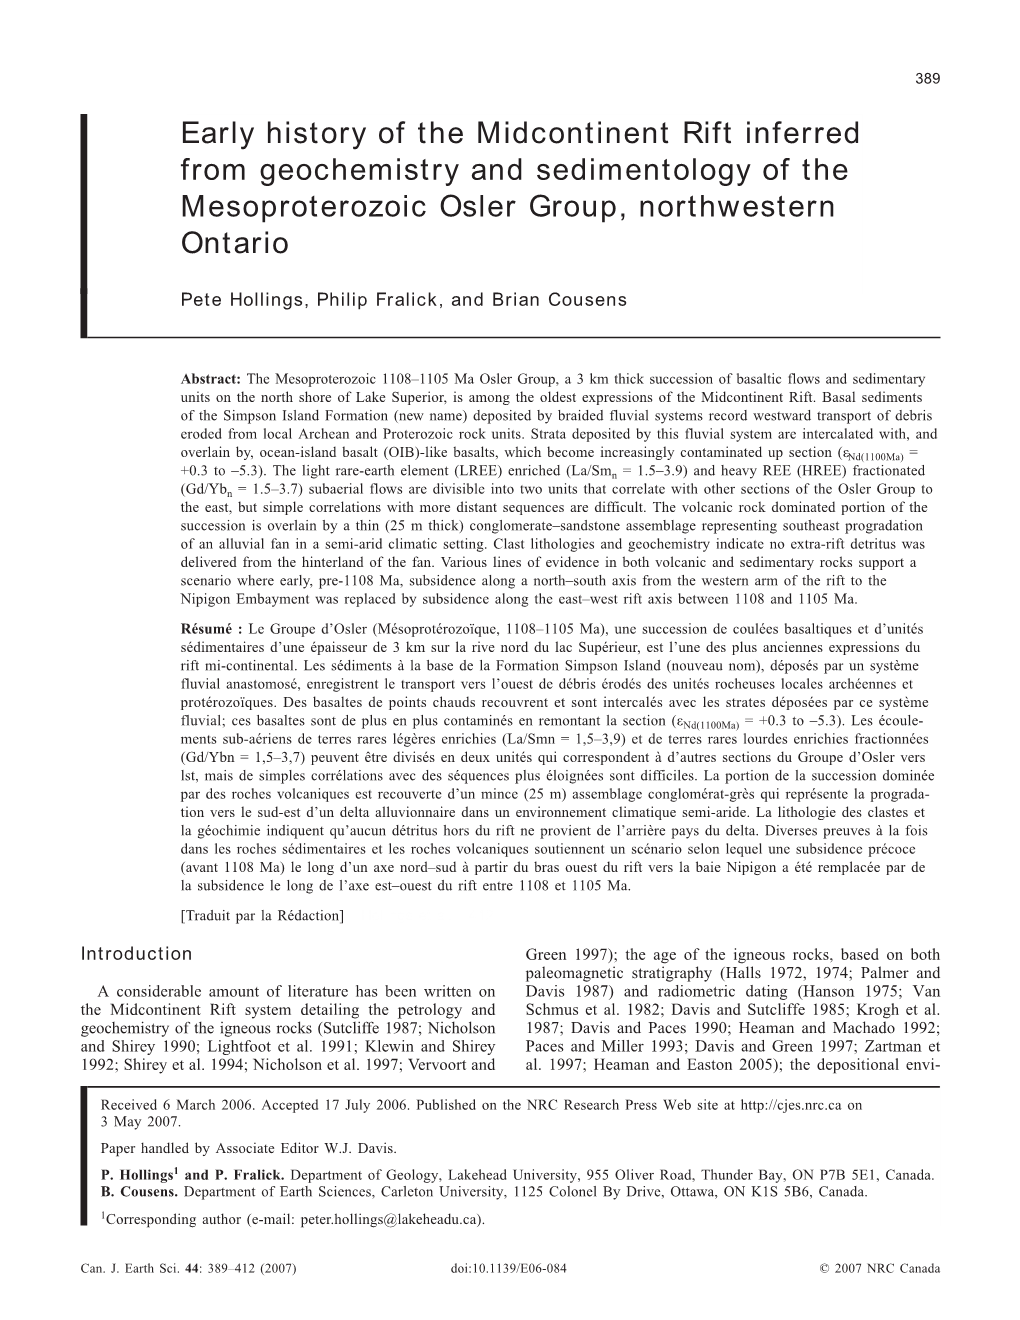 Early History of the Midcontinent Rift Inferred from Geochemistry and Sedimentology of the Mesoproterozoic Osler Group, Northwestern Ontario